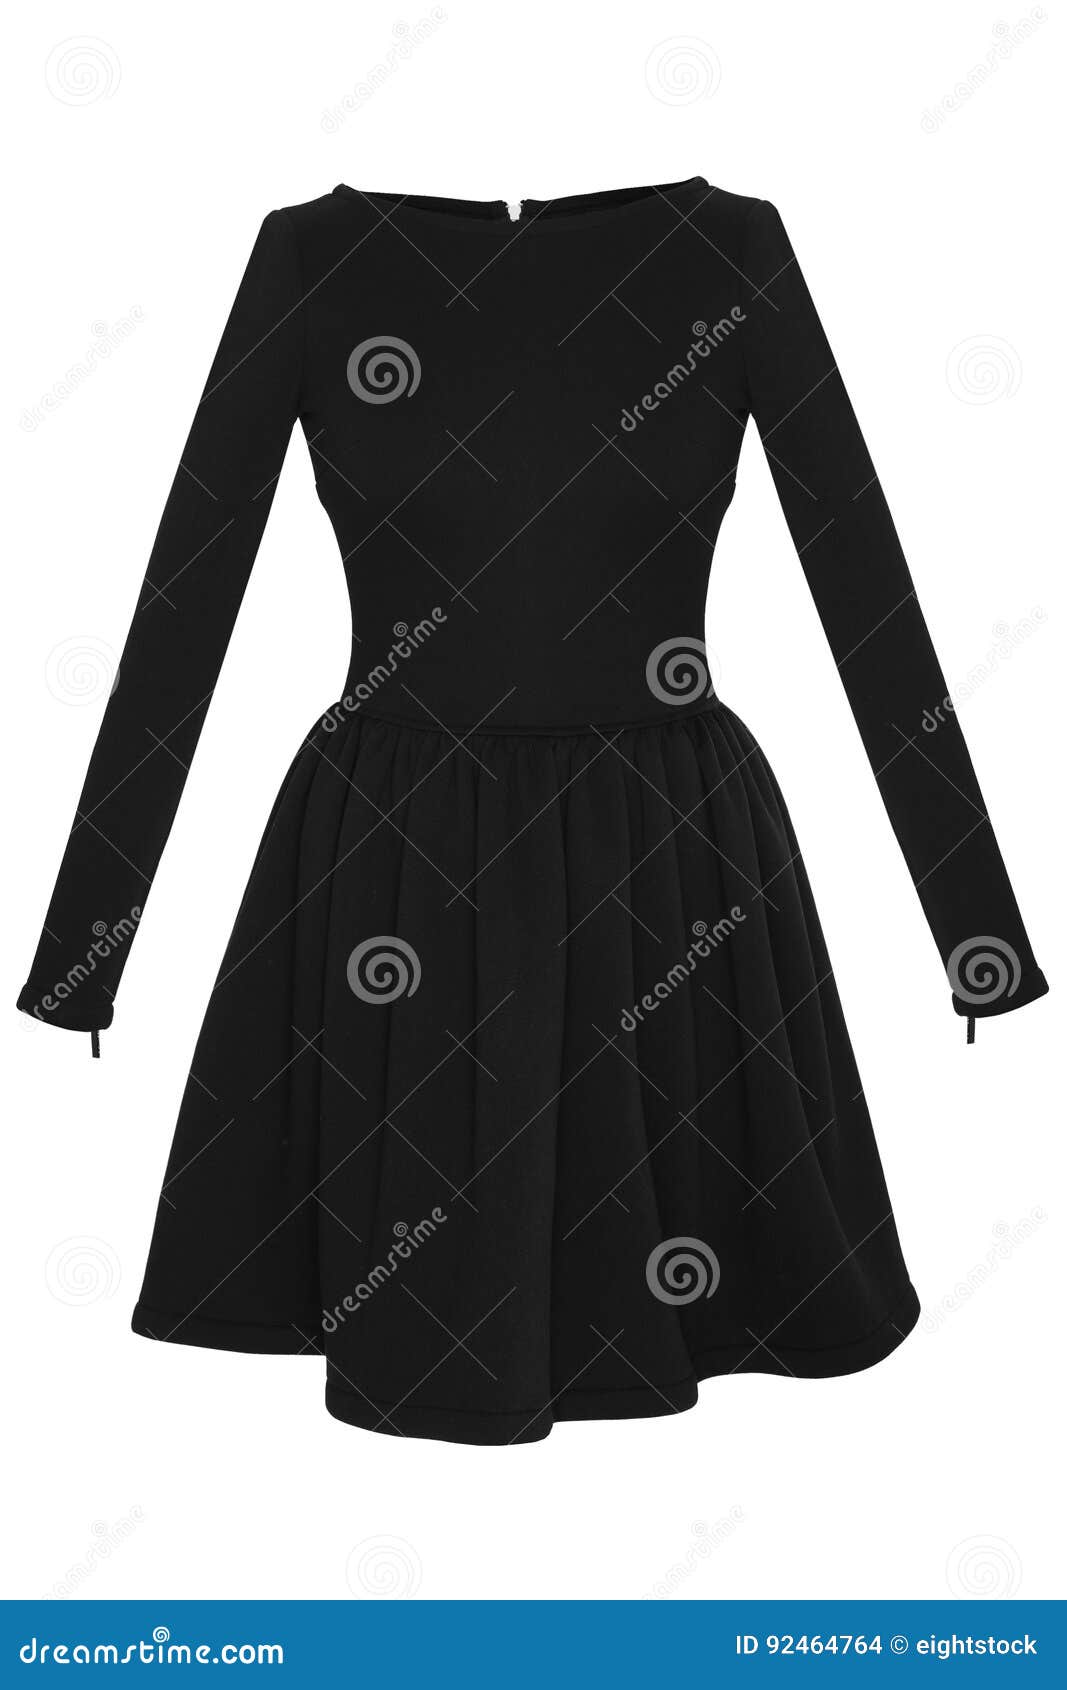 Classic Black Dress on White Background Stock Photo - Image of boots ...